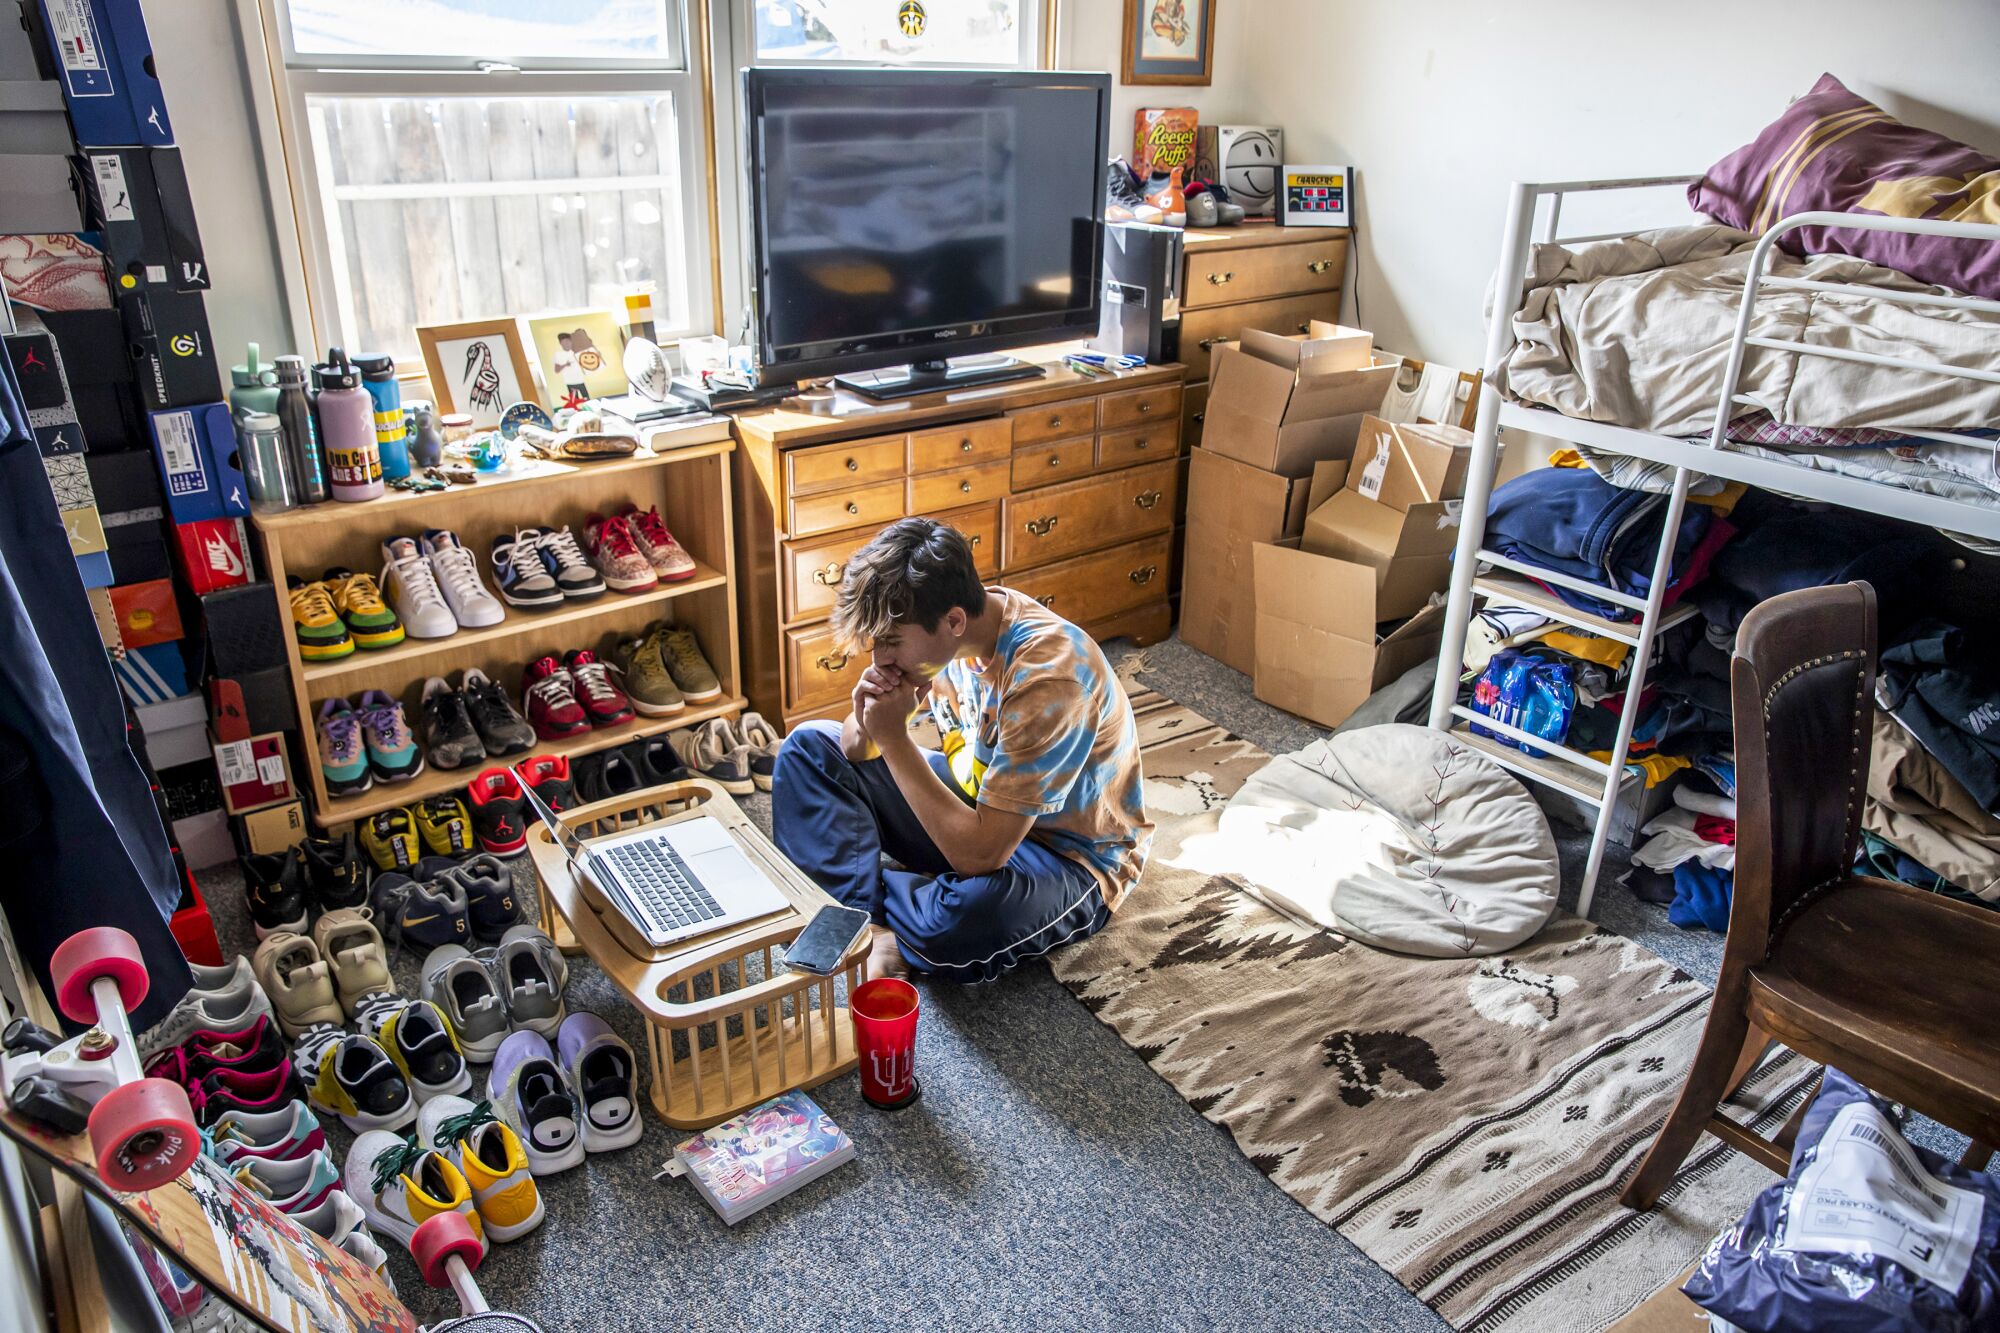 A young man watches a lecture on his computer from the floor of his room filled with shoes and furniture